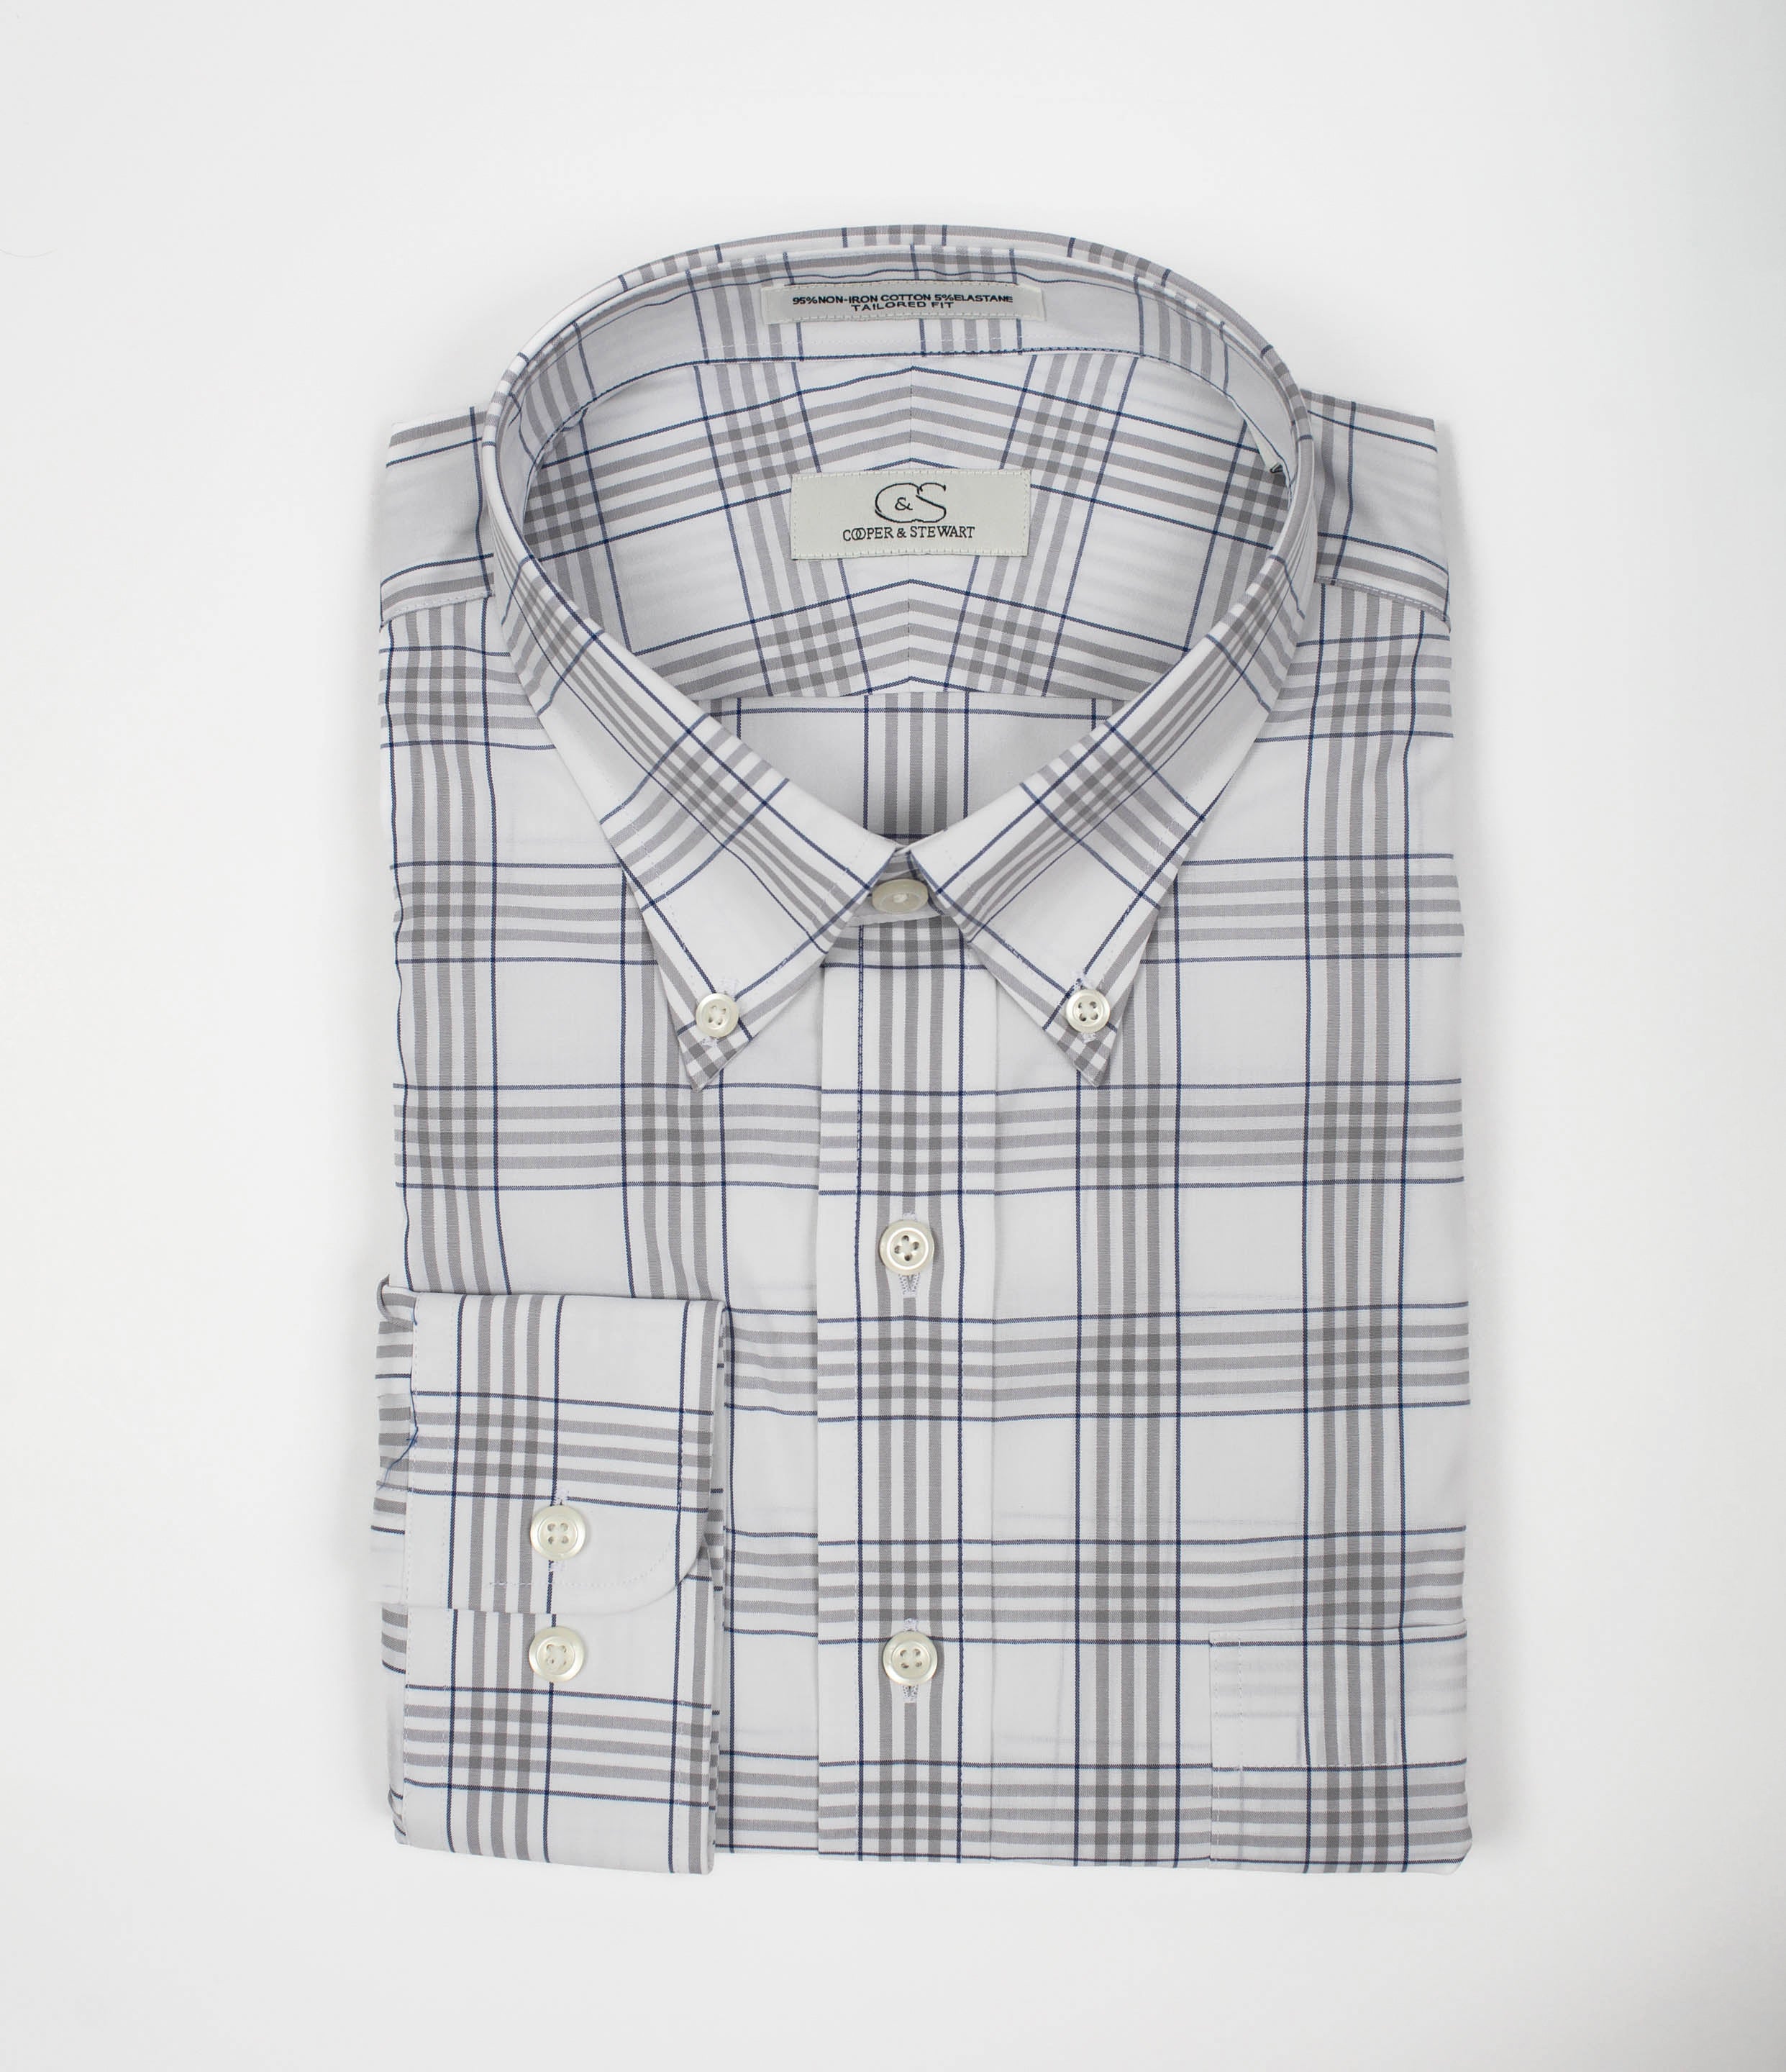 090 TF BD - Off White Windowpane w/Blue & Taupe Tailored Fit Button Down Collar (95/5)